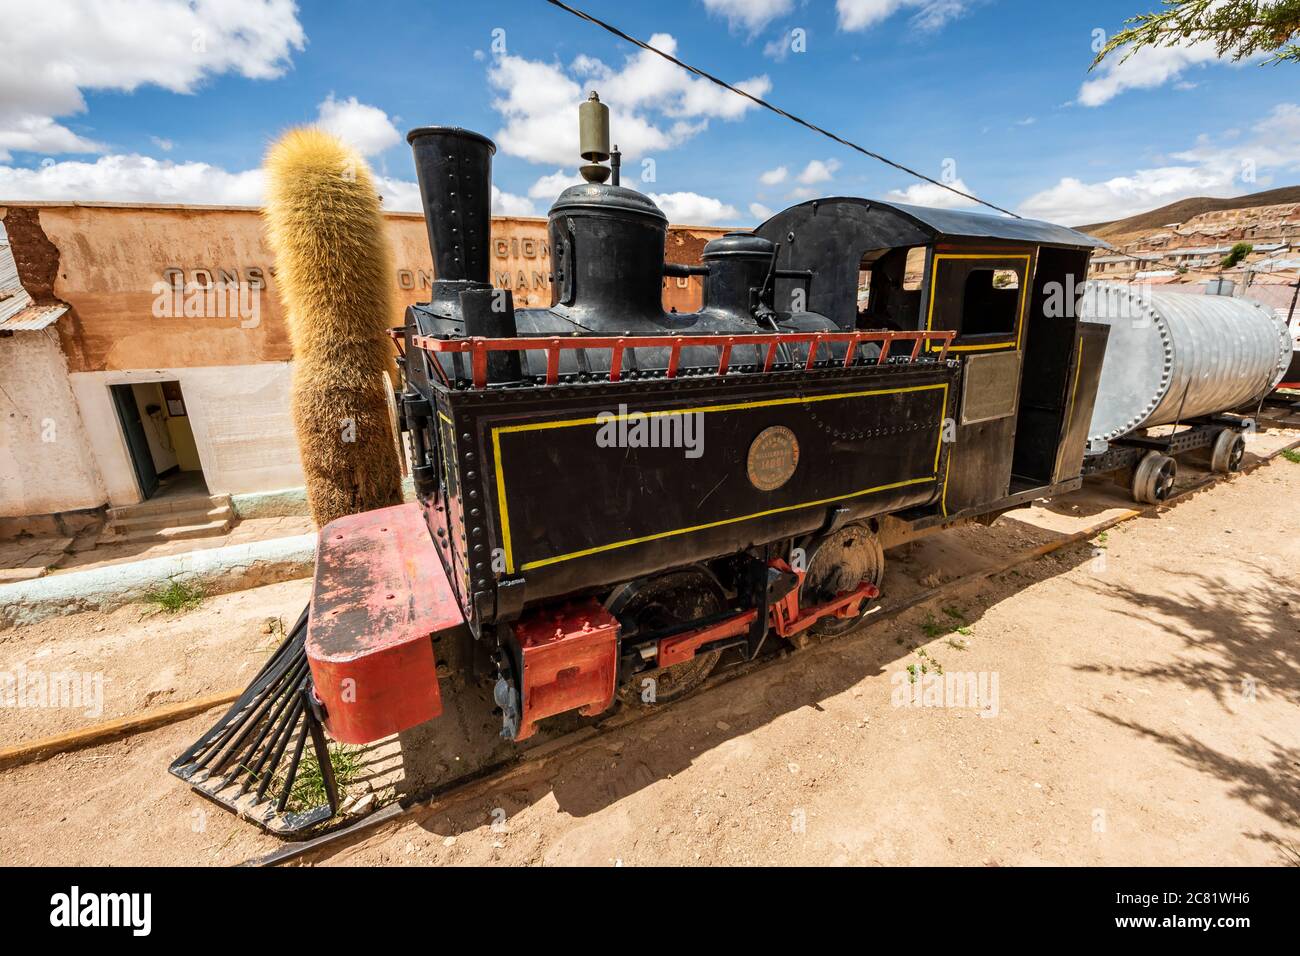 Baldwin locomotive 14301, built in 1895, partially restored and plinthed above mine entrance; Pulacayo, Potosi Department, Bolivia Stock Photo